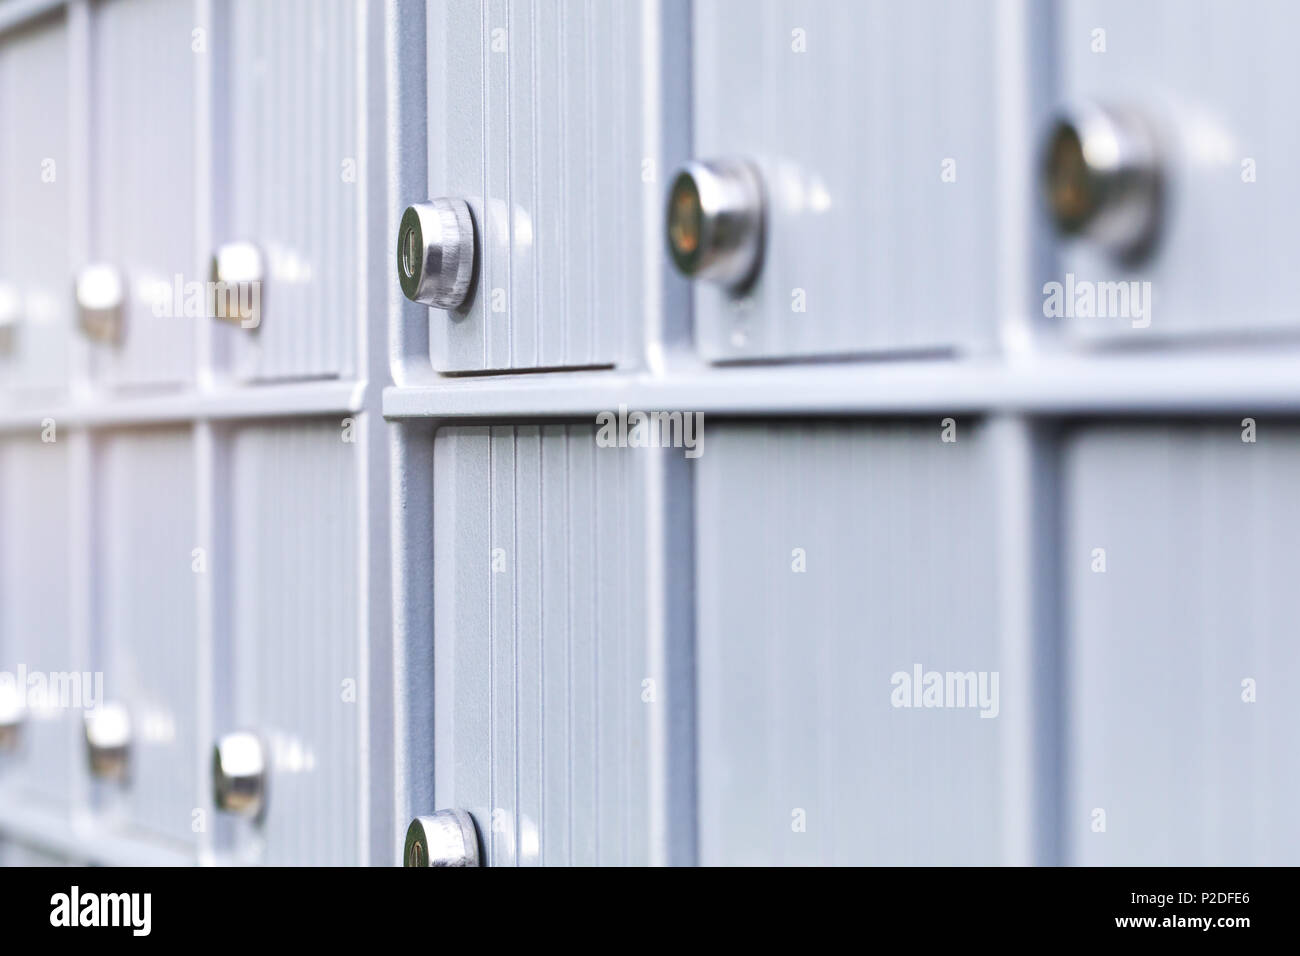 Metal mailboxes and lock in business center of an urban neighborhood. Mail boxes in rows at entrance of modern building. Security storage mailroom Stock Photo